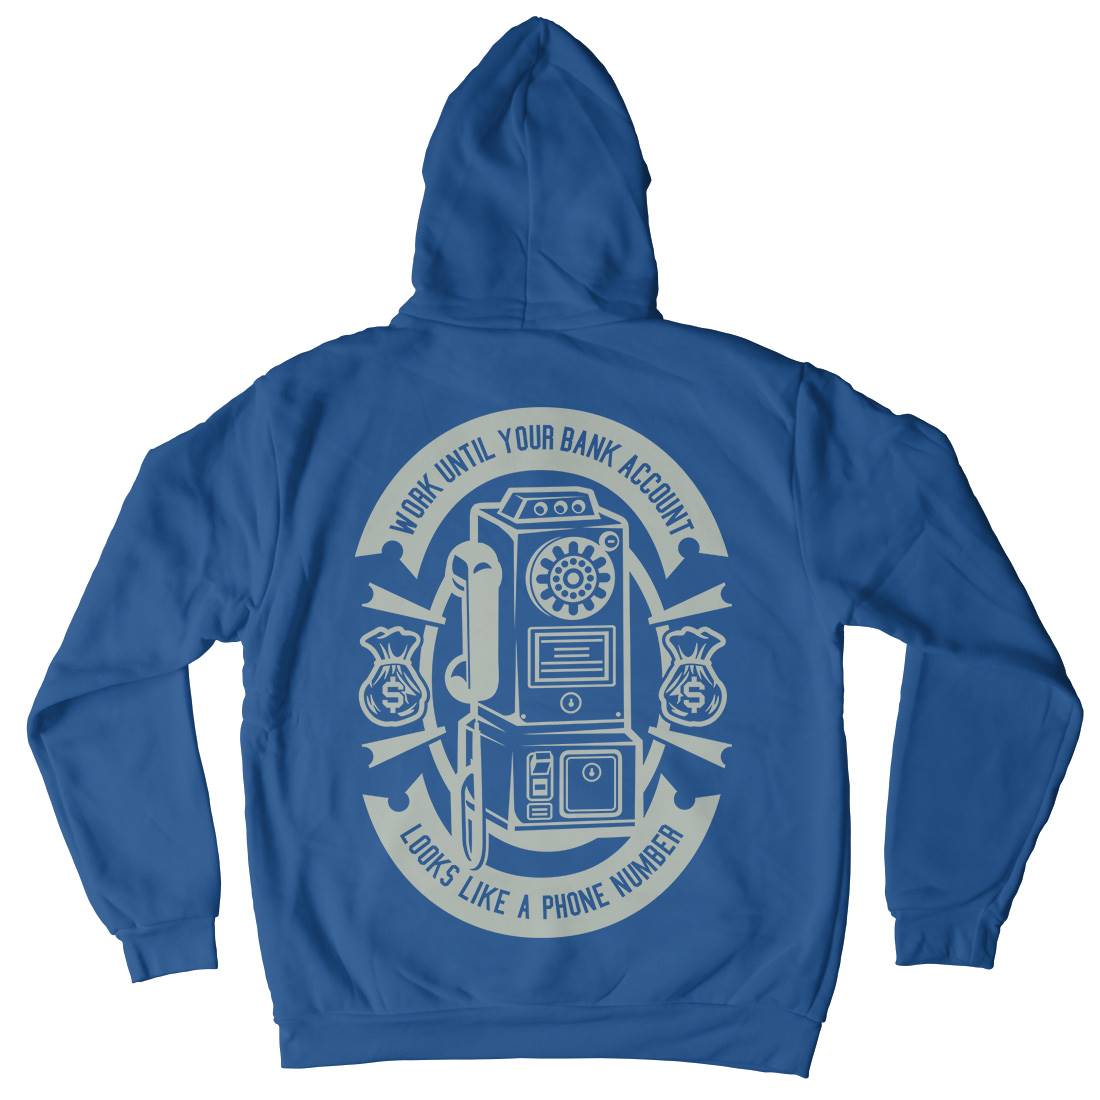 Phone Number Mens Hoodie With Pocket Quotes A258